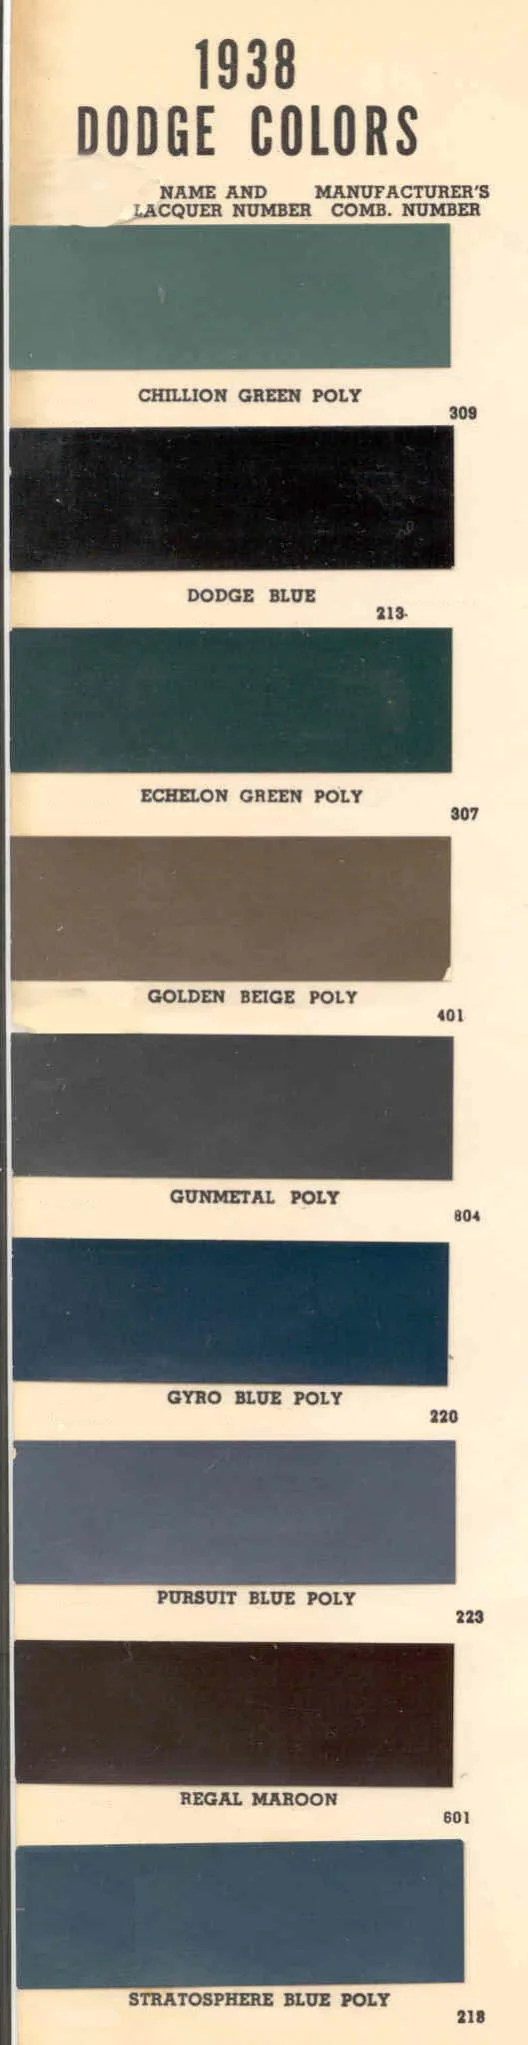 Summary Of Colors used on all Dodge Vehicles in 1938